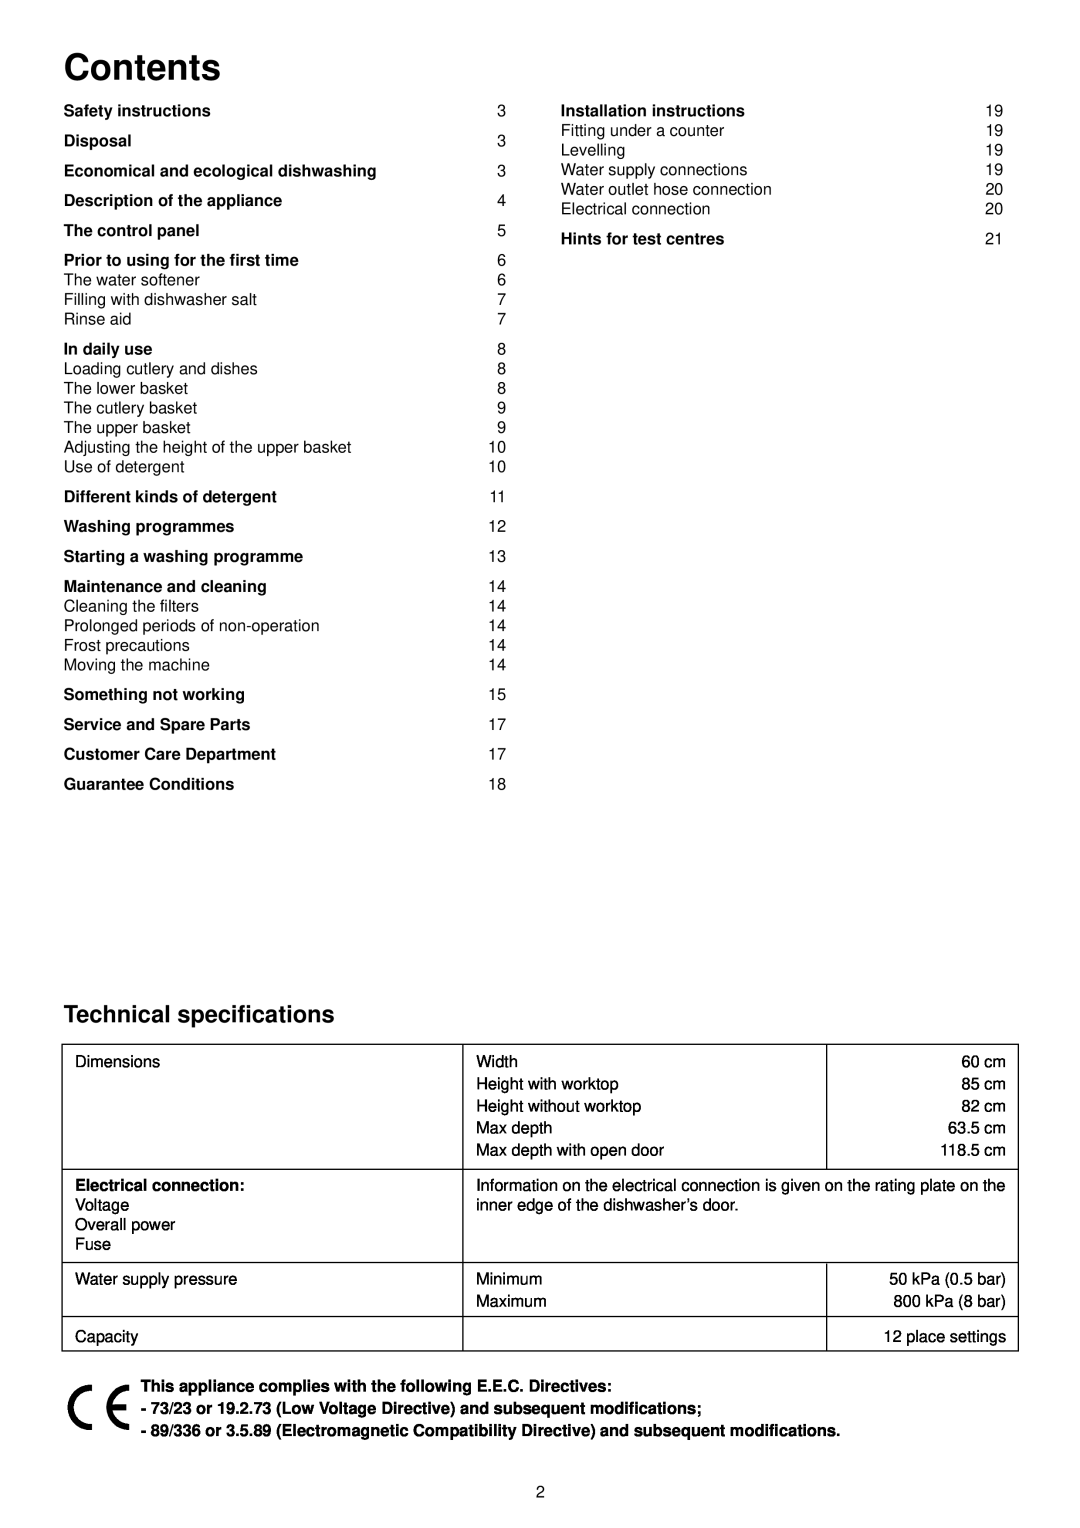 Zanussi ZSF 6161 S manual Contents, Technical specifications 